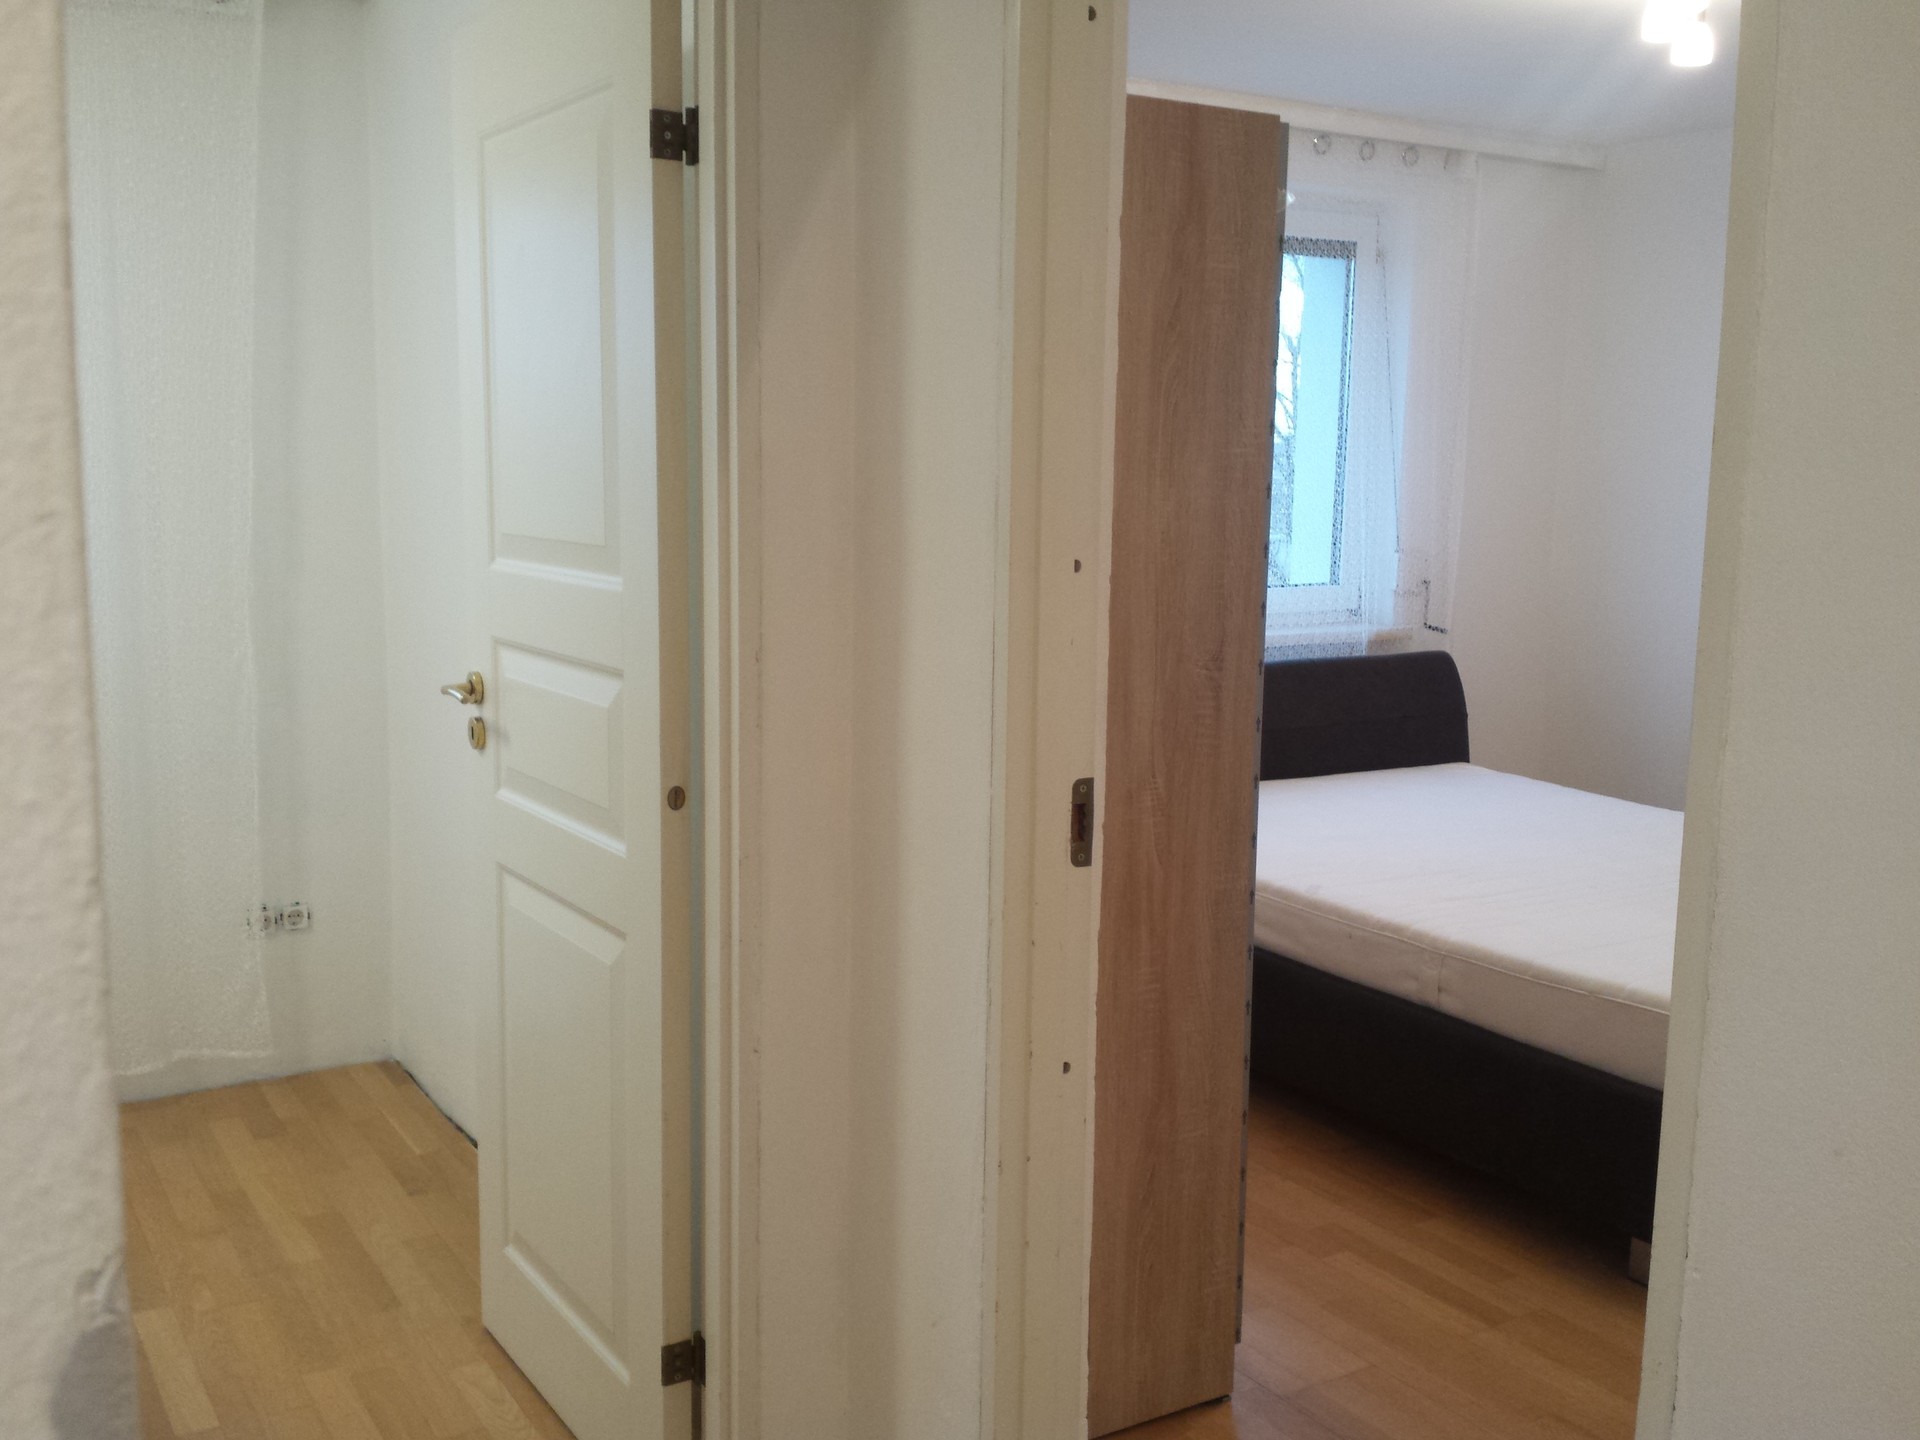 Comfortable two (2) bedroom apartment for rent in Zagreb (Students only) | apartment rentals in Zagreb 5